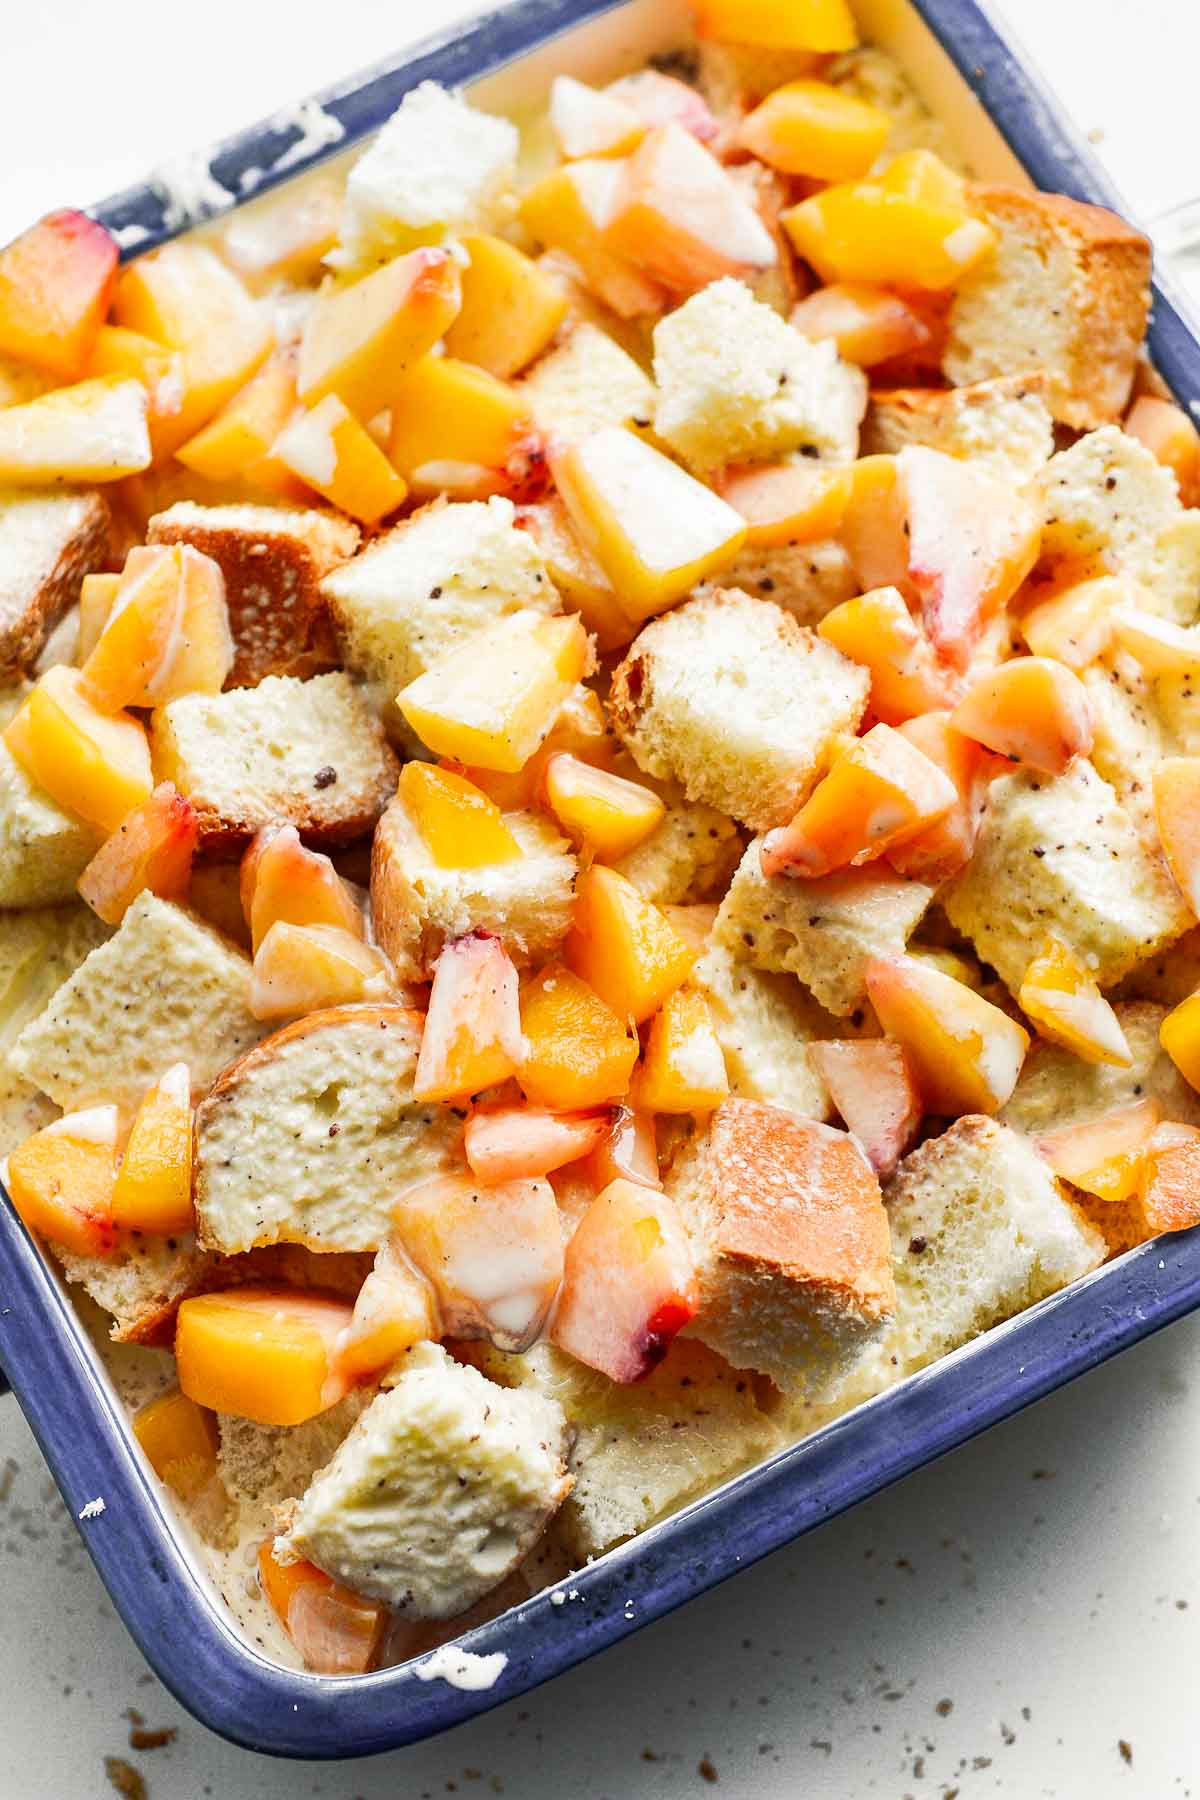 Cubed bread and diced peaches in a baking pan with milk and egg mixture poured on top